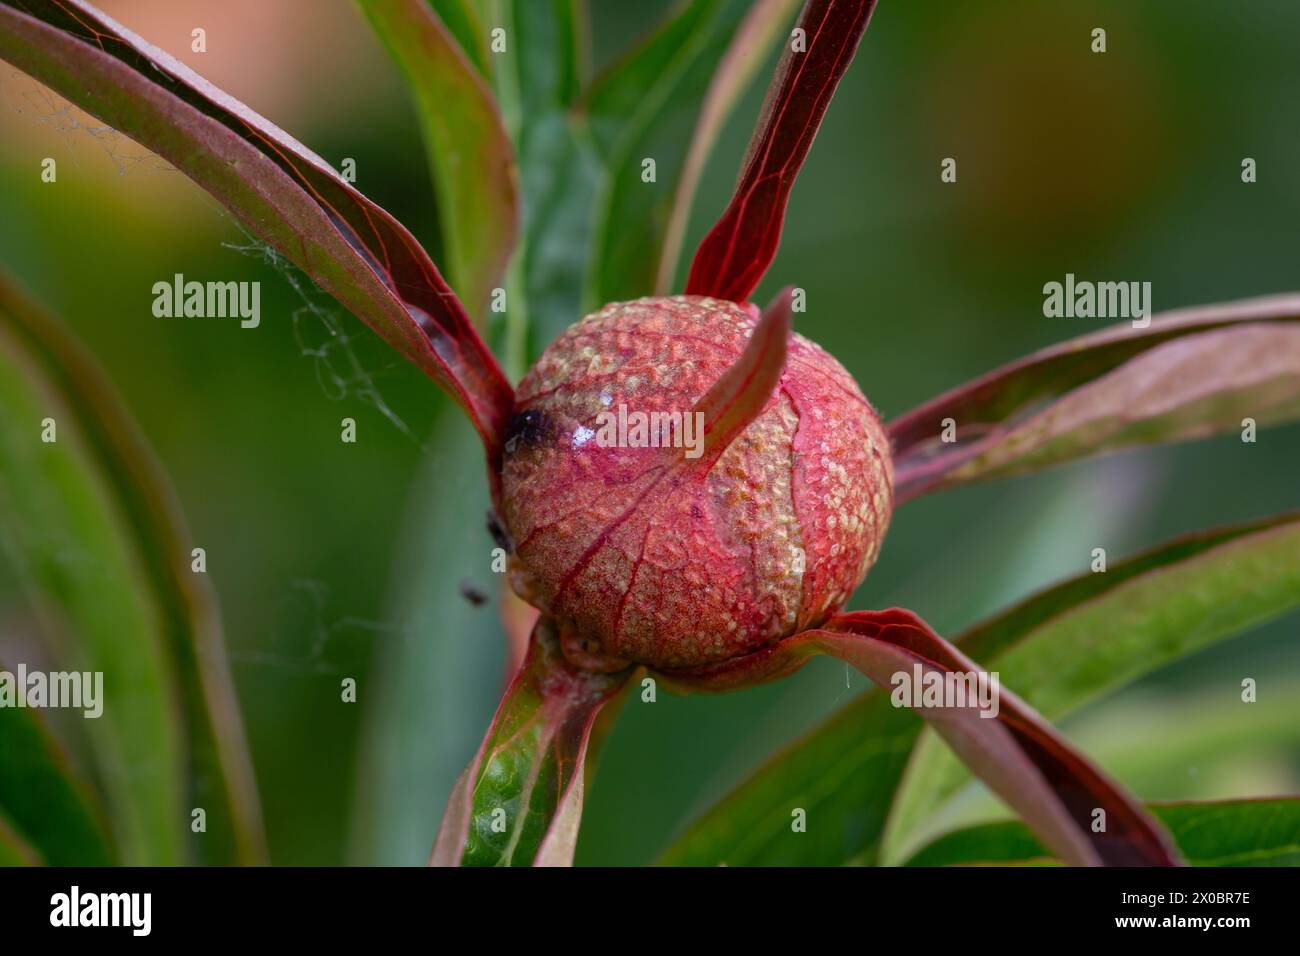 Close-up of the bud of a peony flower (Paeonia) with green blurred background Stock Photo